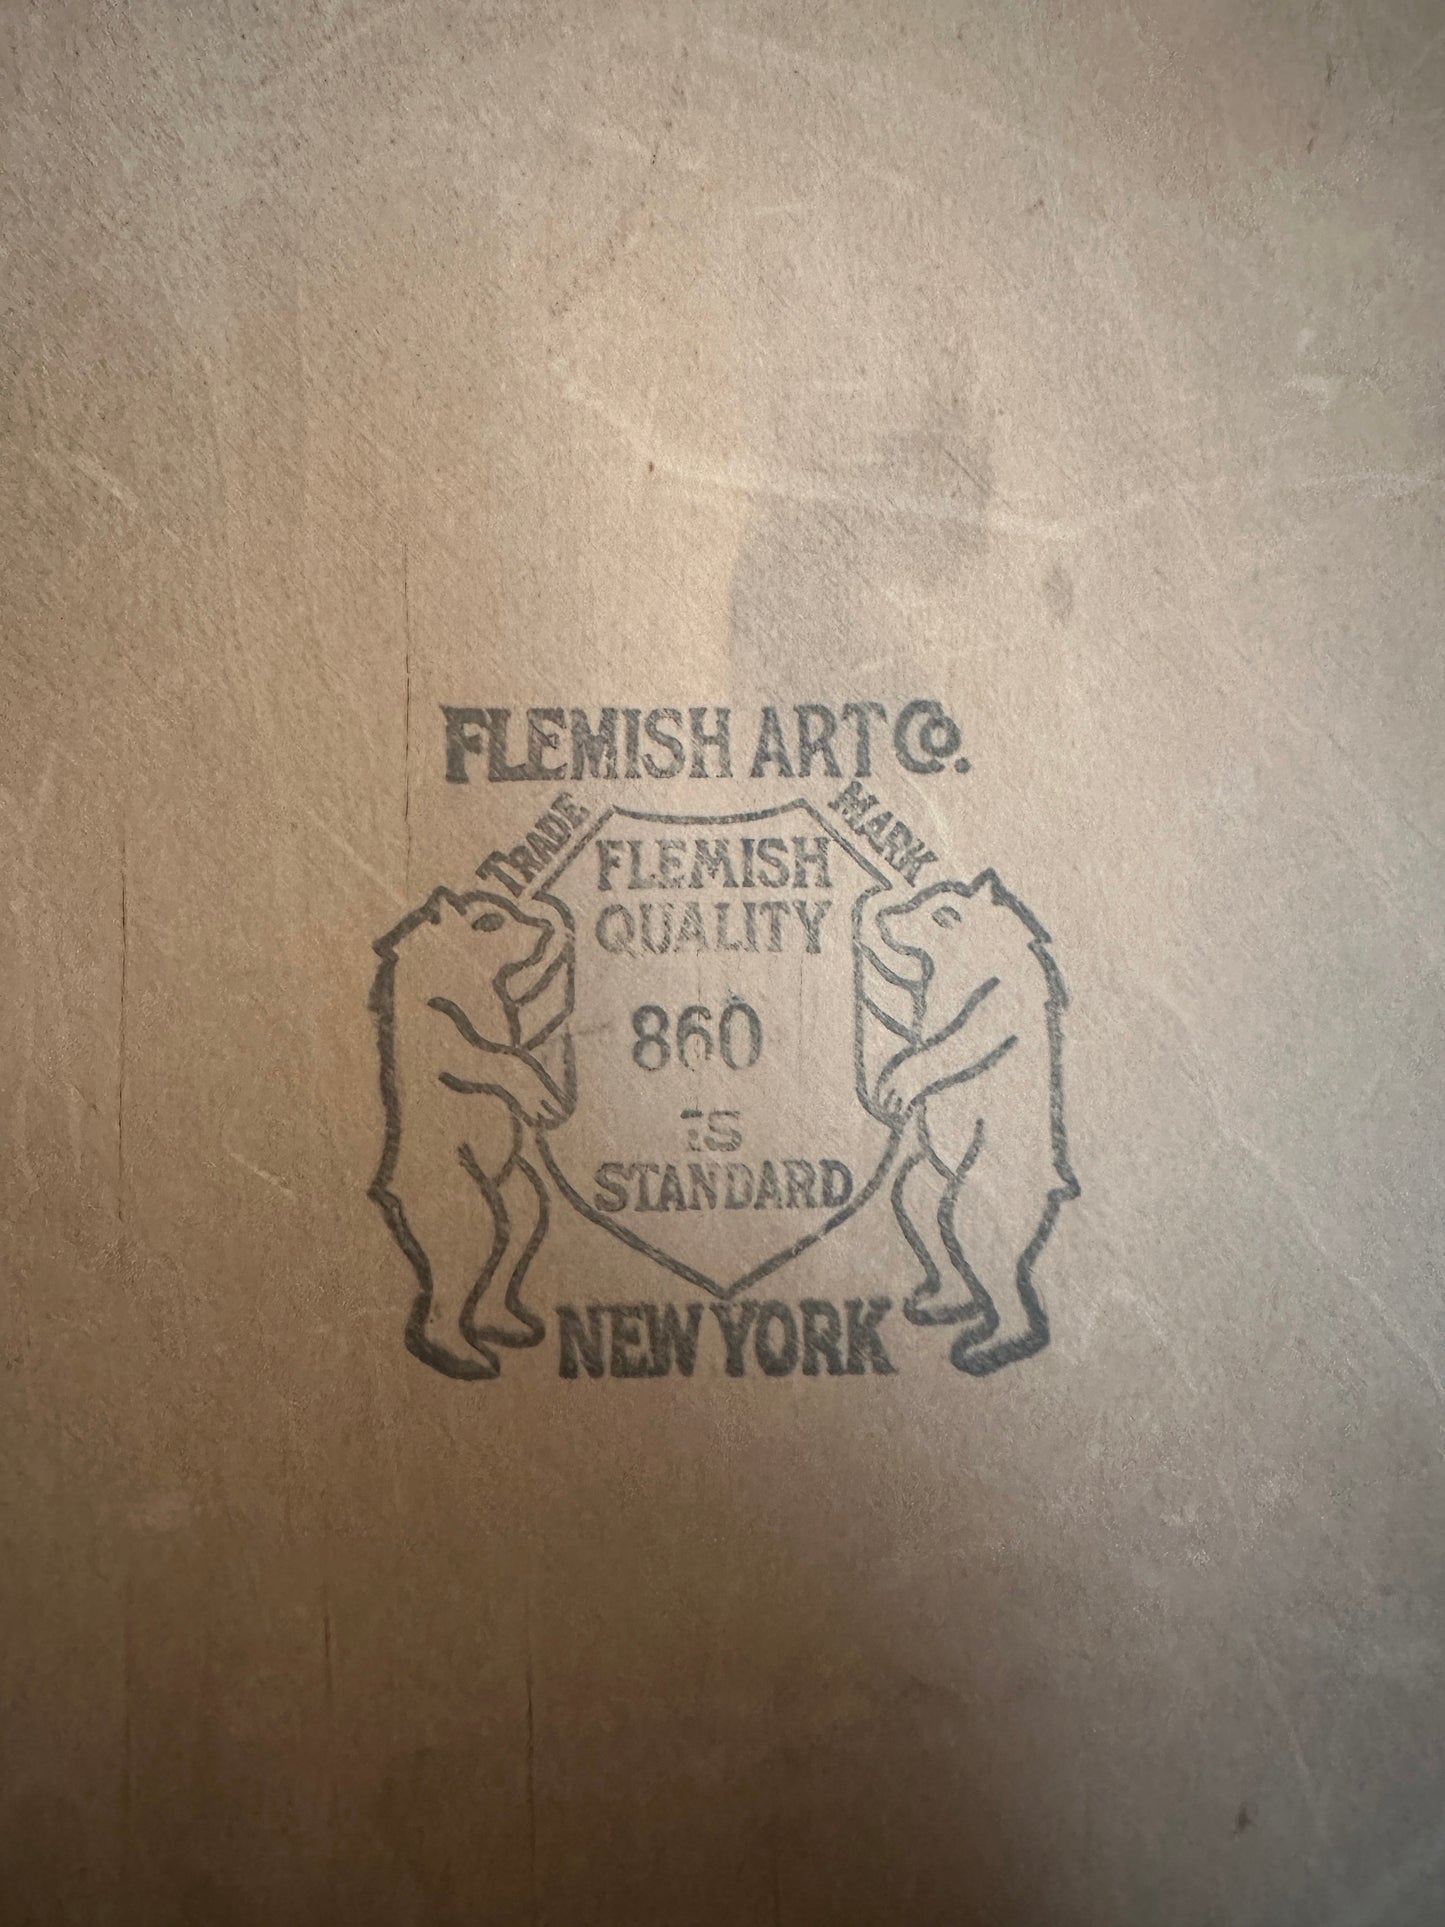 The Flemish Art Co. New York Floral Pyrography